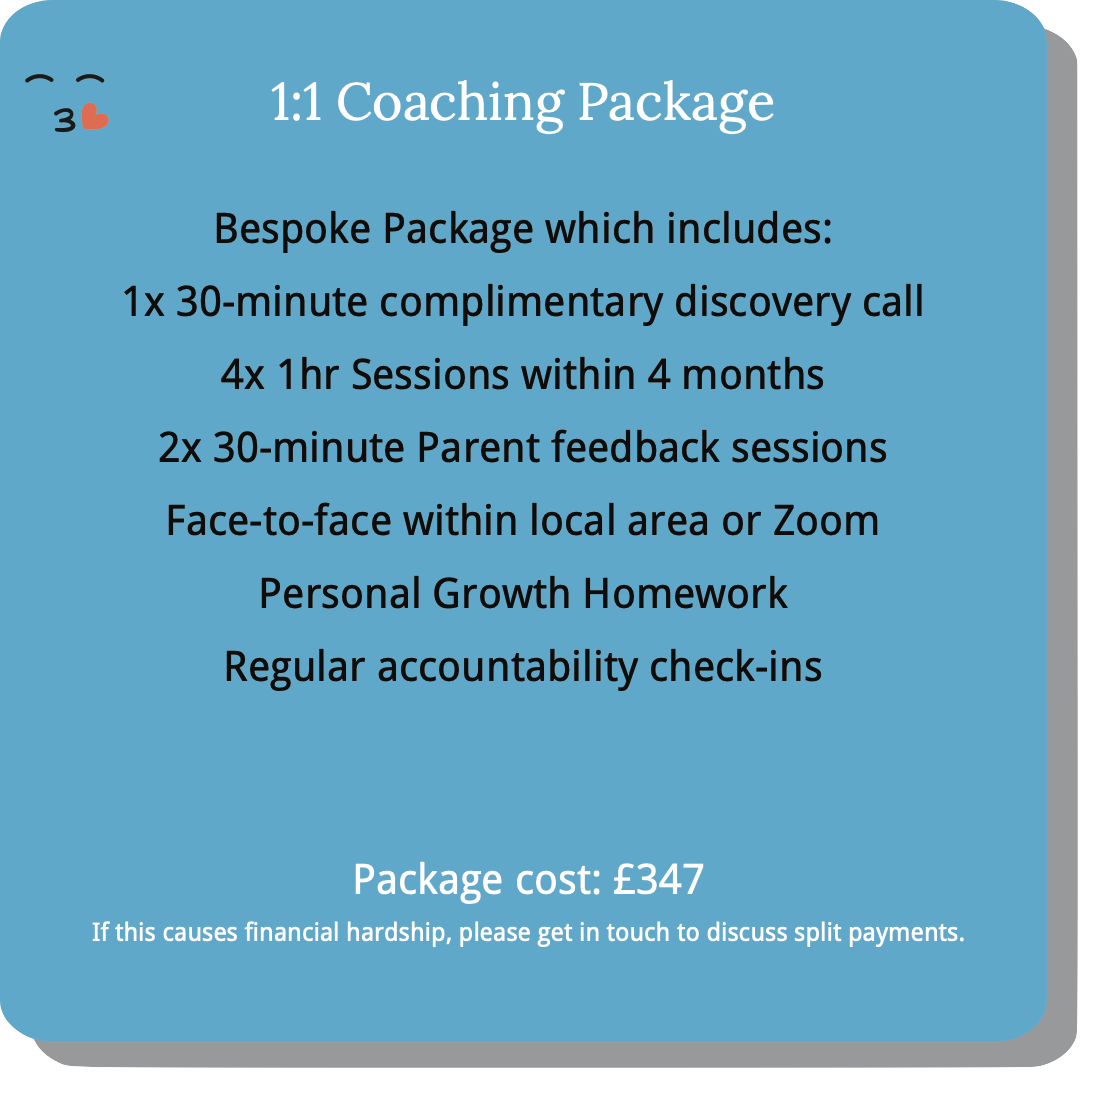 1 to 1 coaching package for children. Four or eight one-hour sessions.